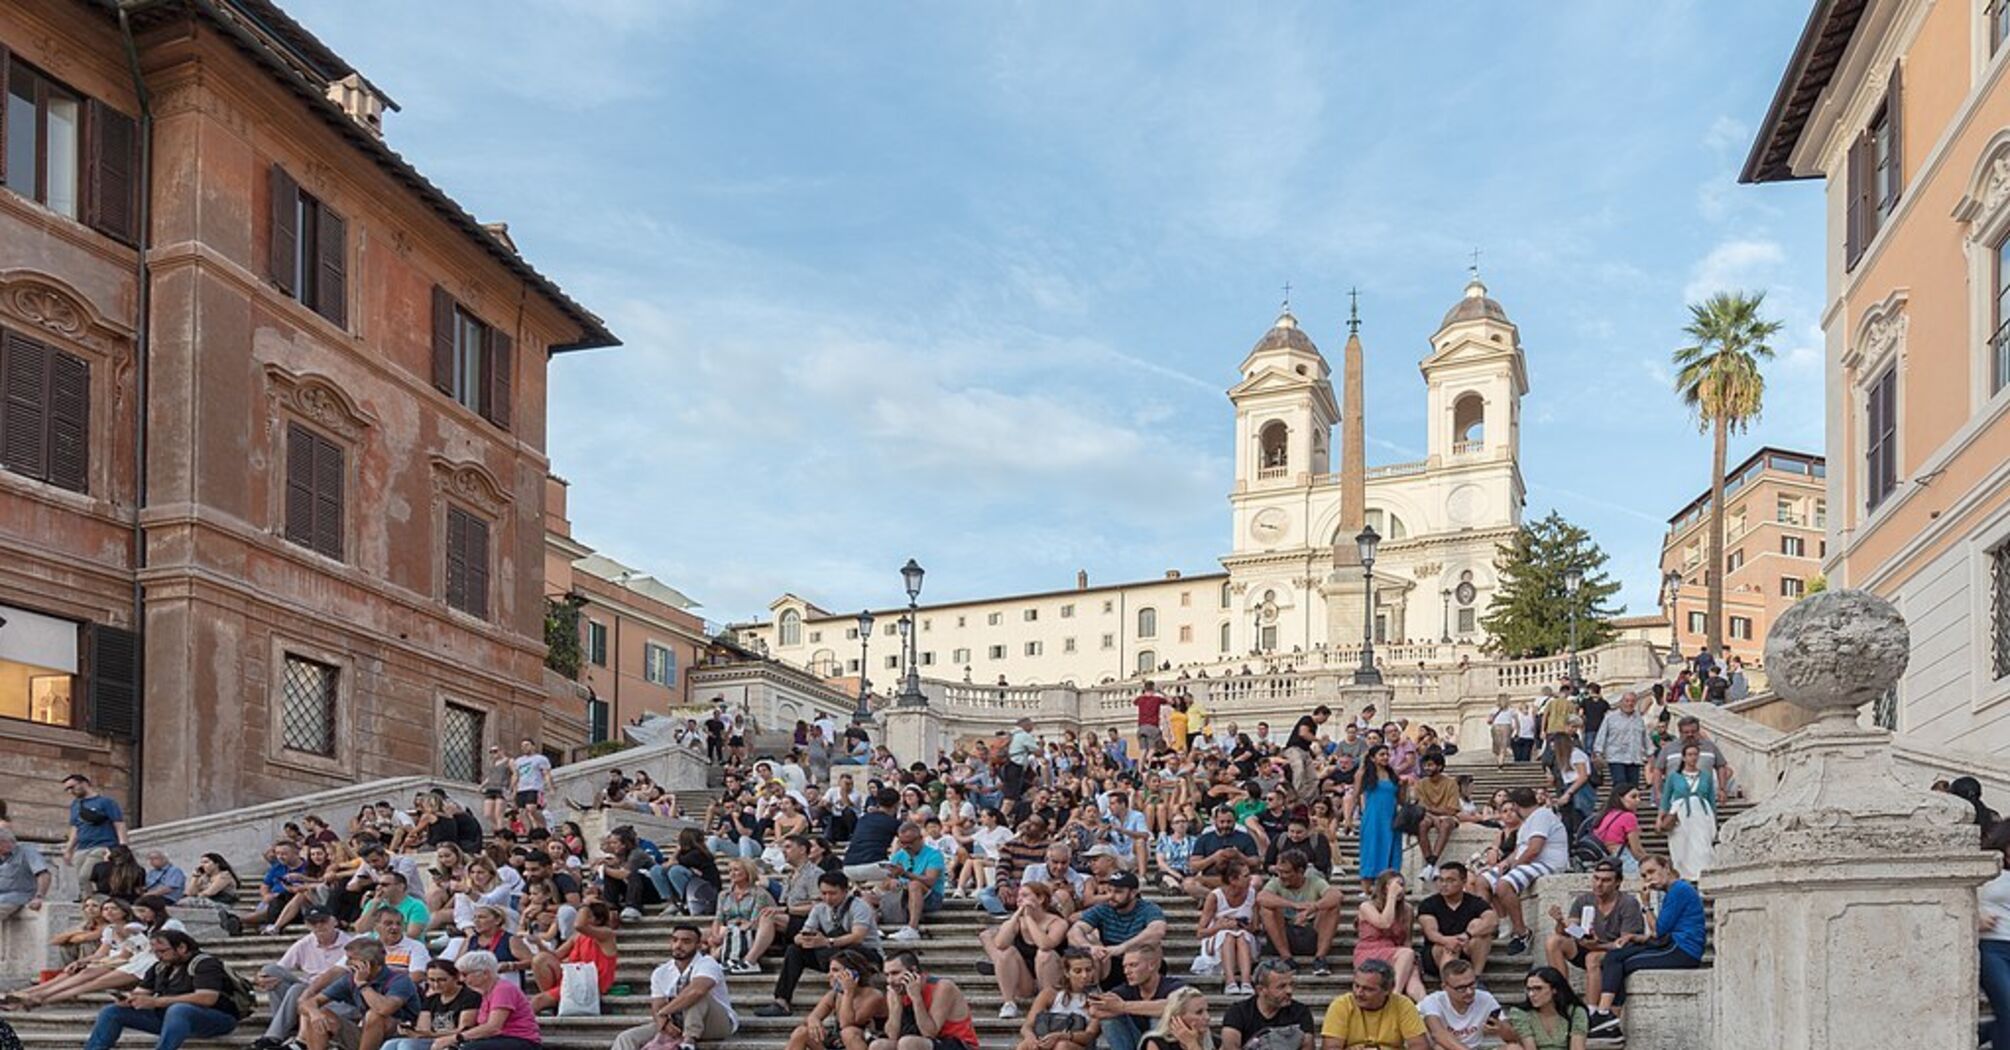 This famous attraction in Rome is not worth your attention due to crowds